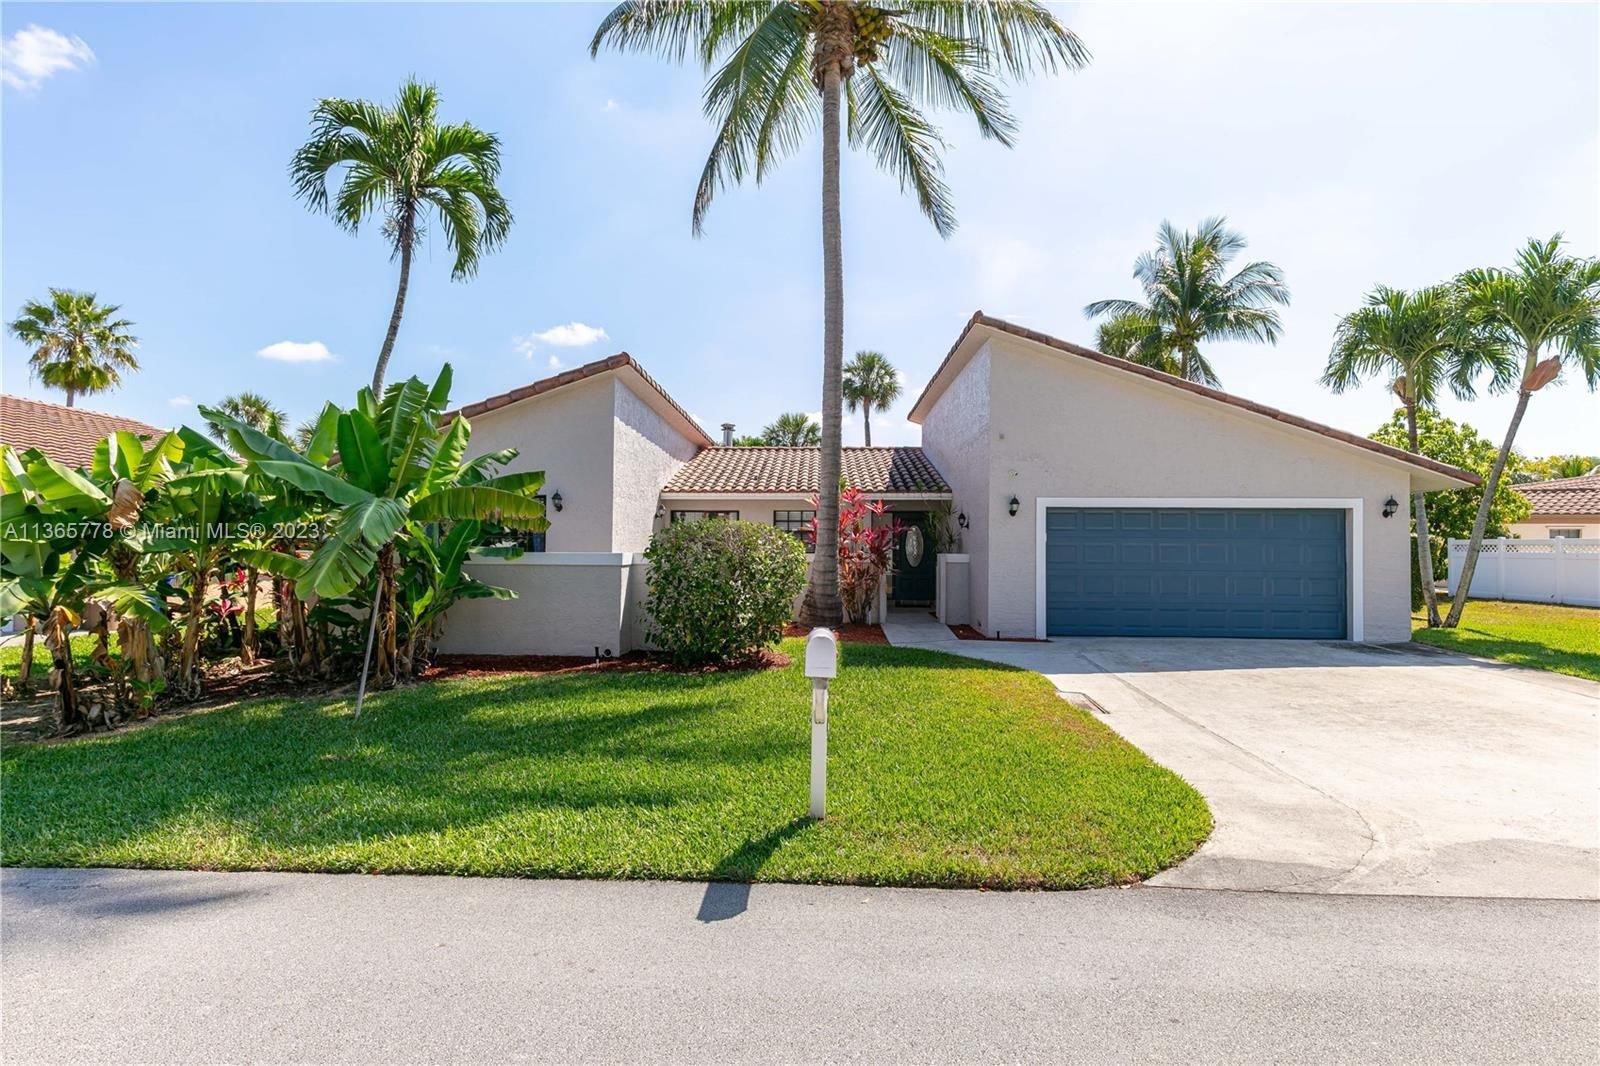 Real estate property located at 400 48th Ave, Broward County, Deerfield Beach, FL